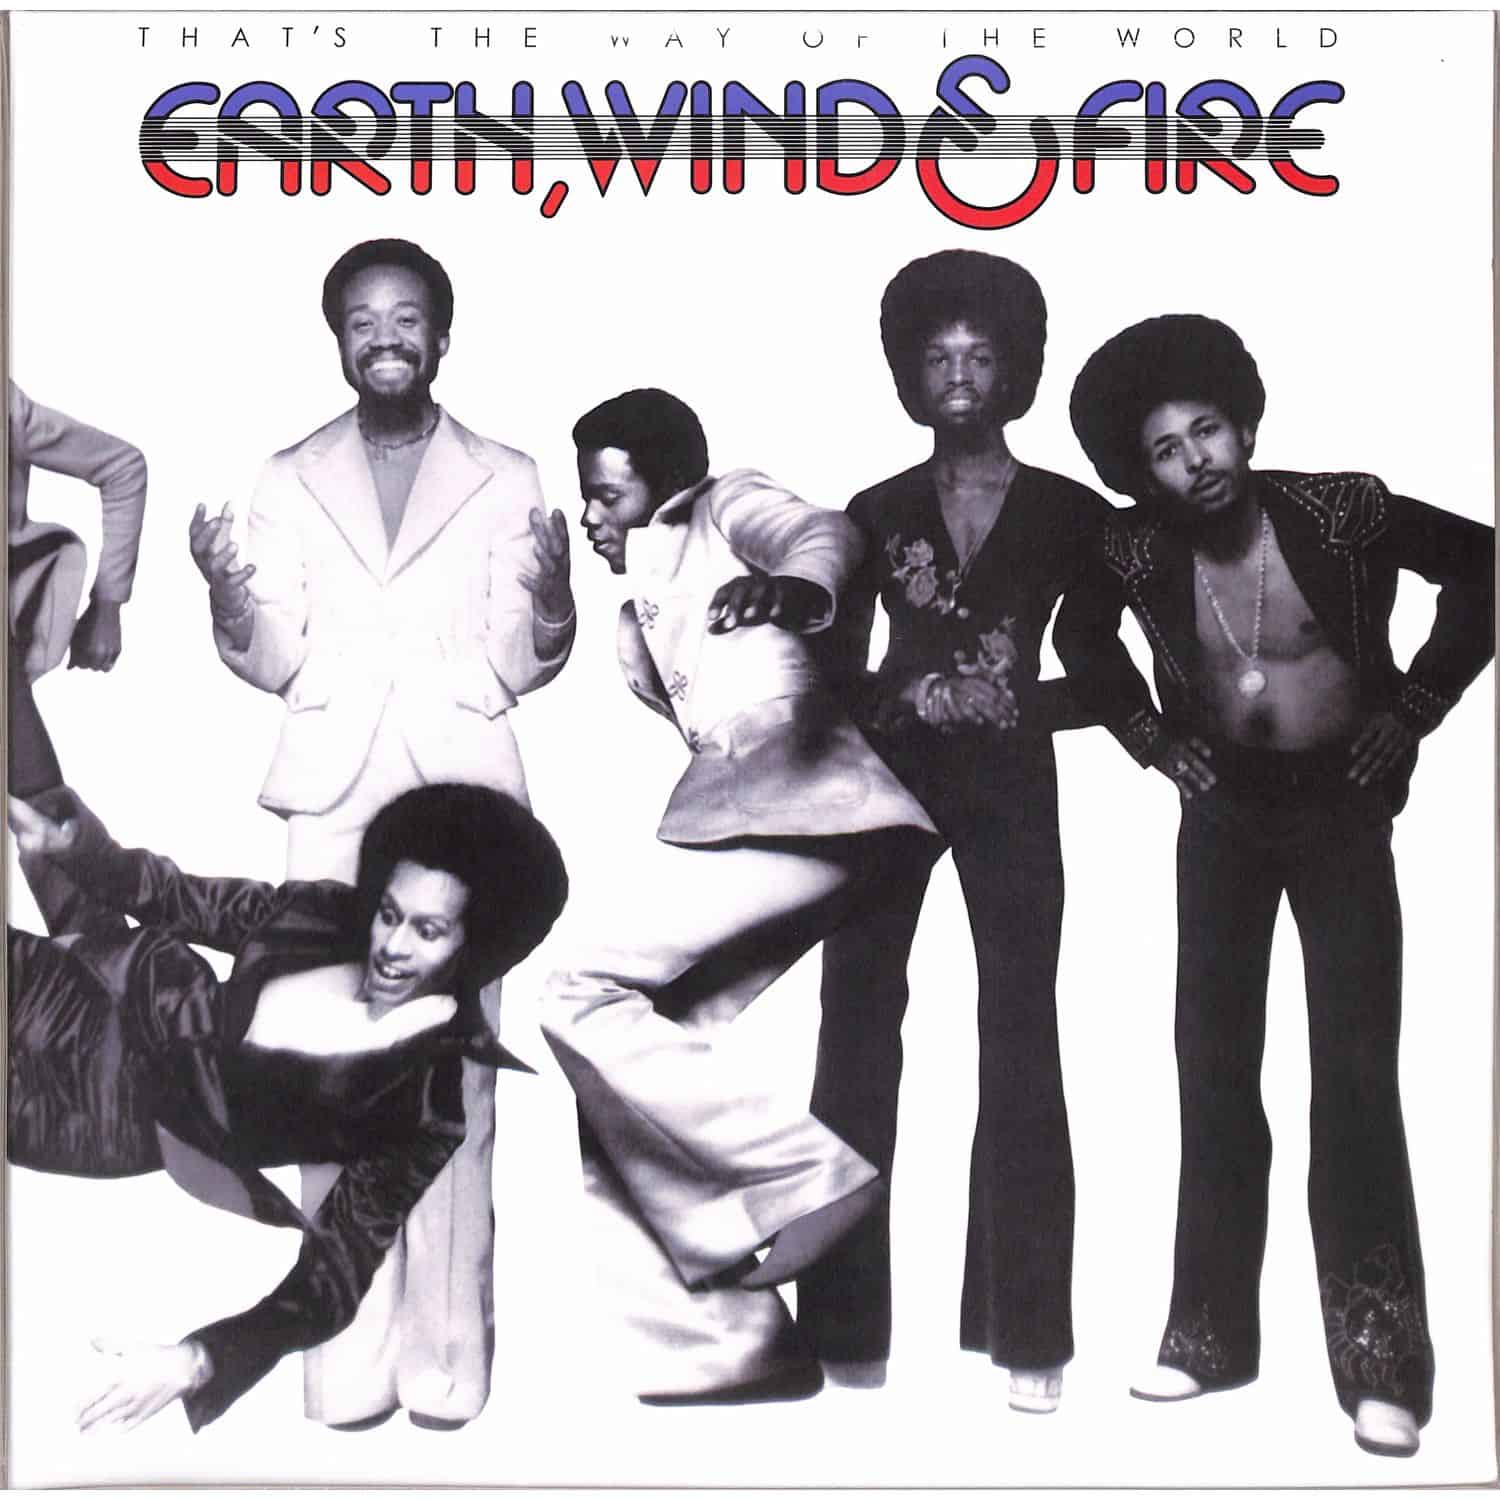 Earth Wind & Fire - THATS THE WAY OF THE WORLD 